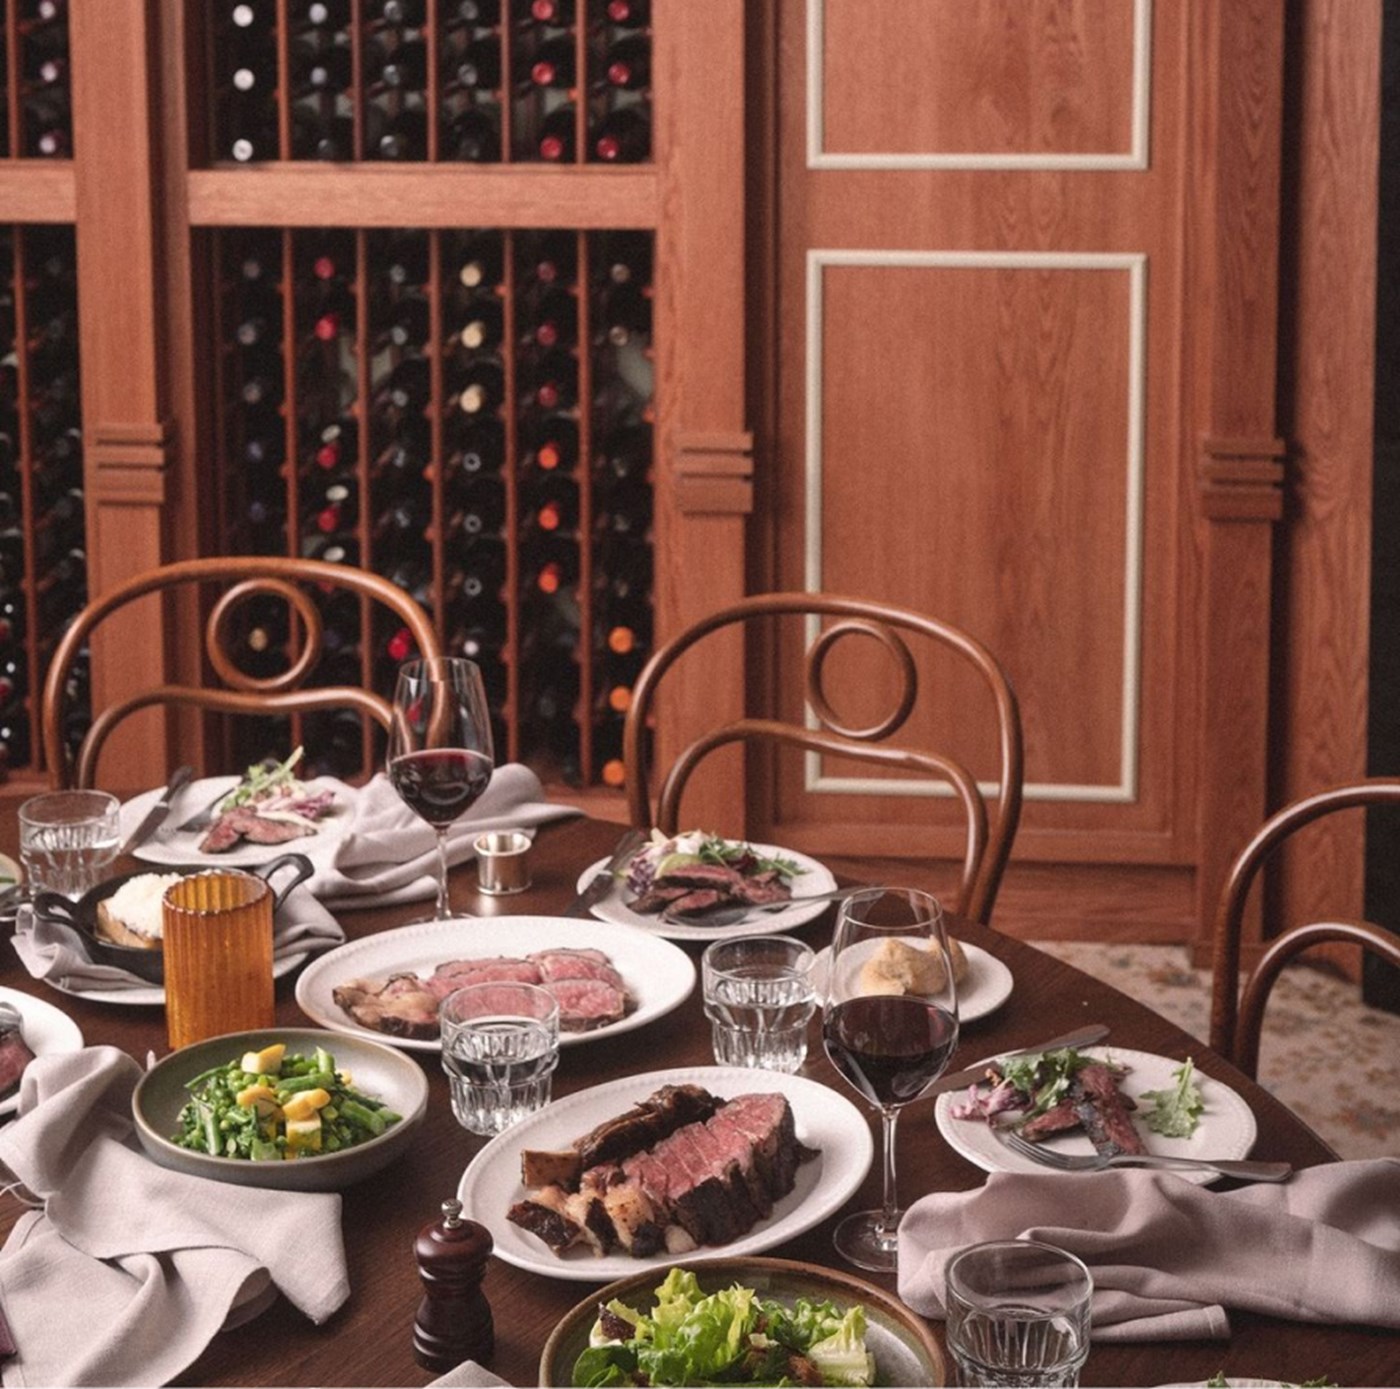 The edge of a circular table with plates of steak and salad against a backdrop of stacked wines 